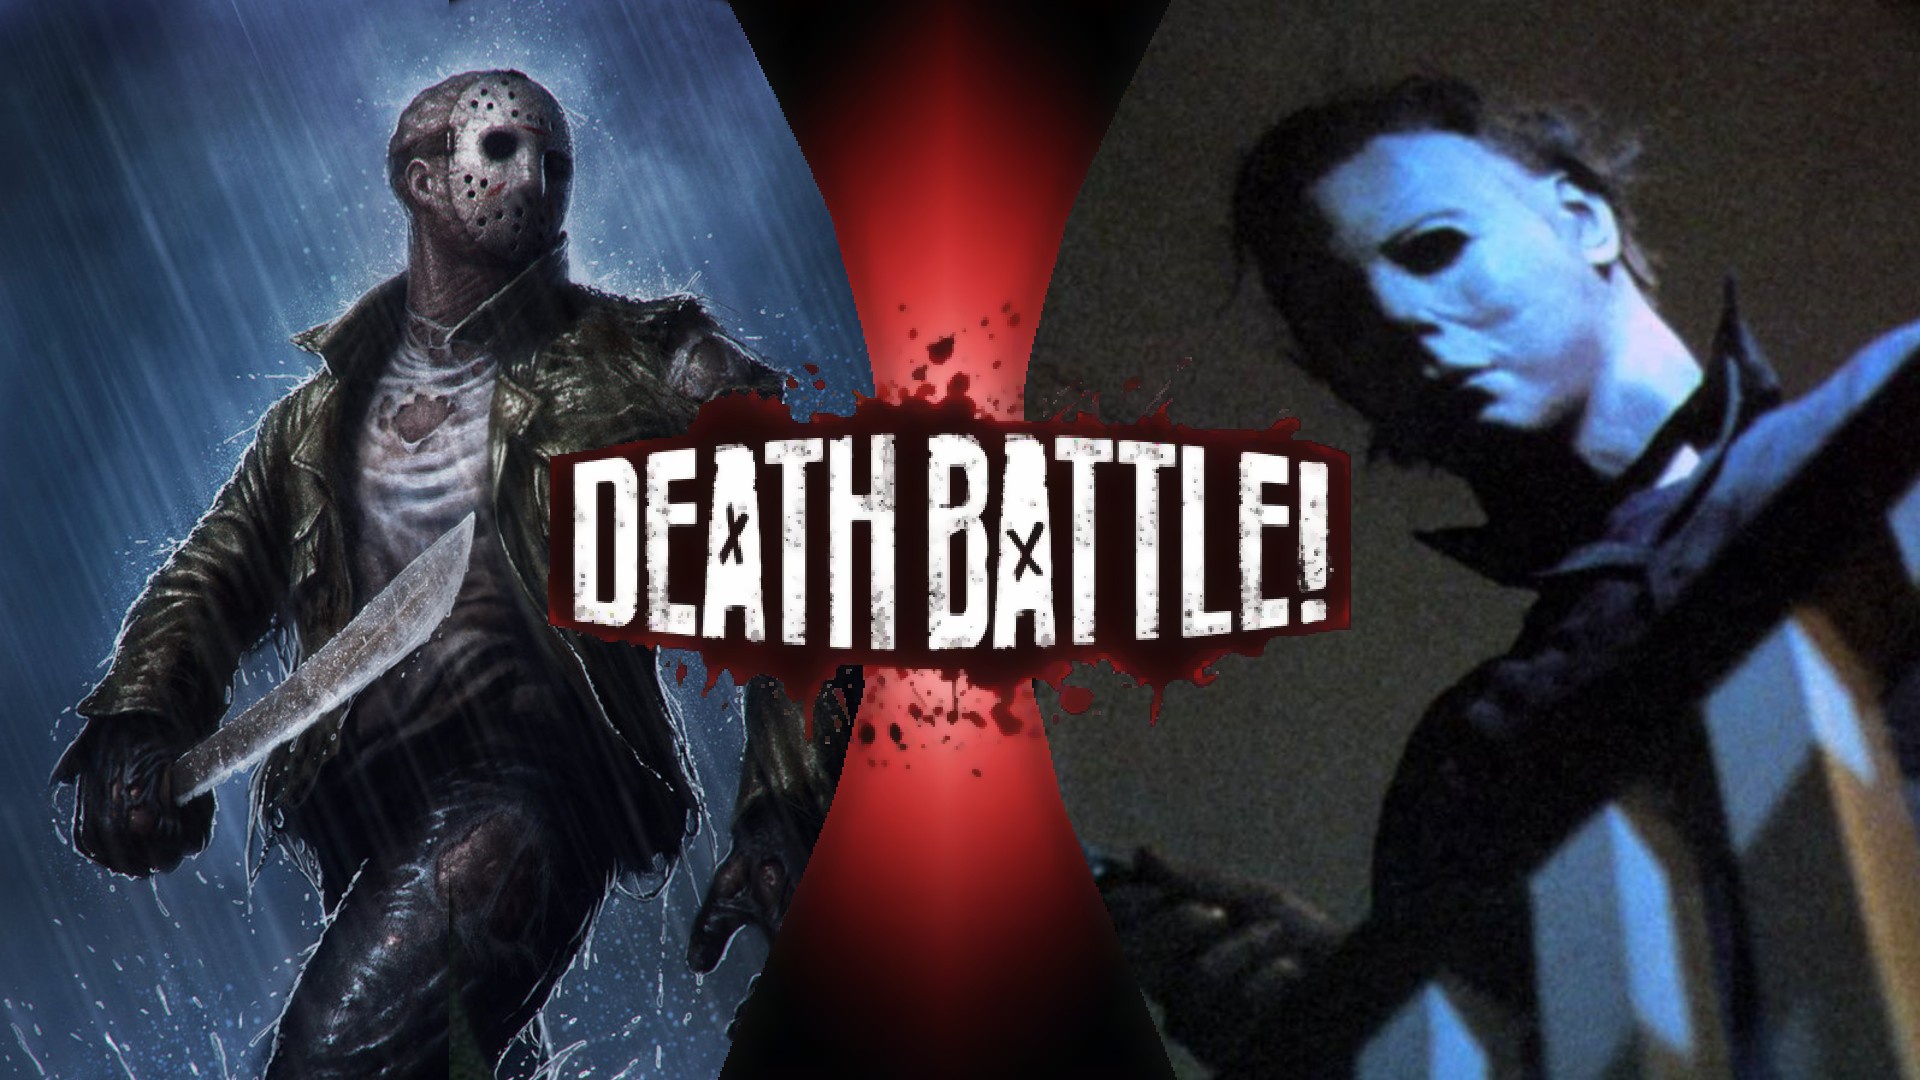 Michael Myers vs Jason Voorhees, who would win in a fight?